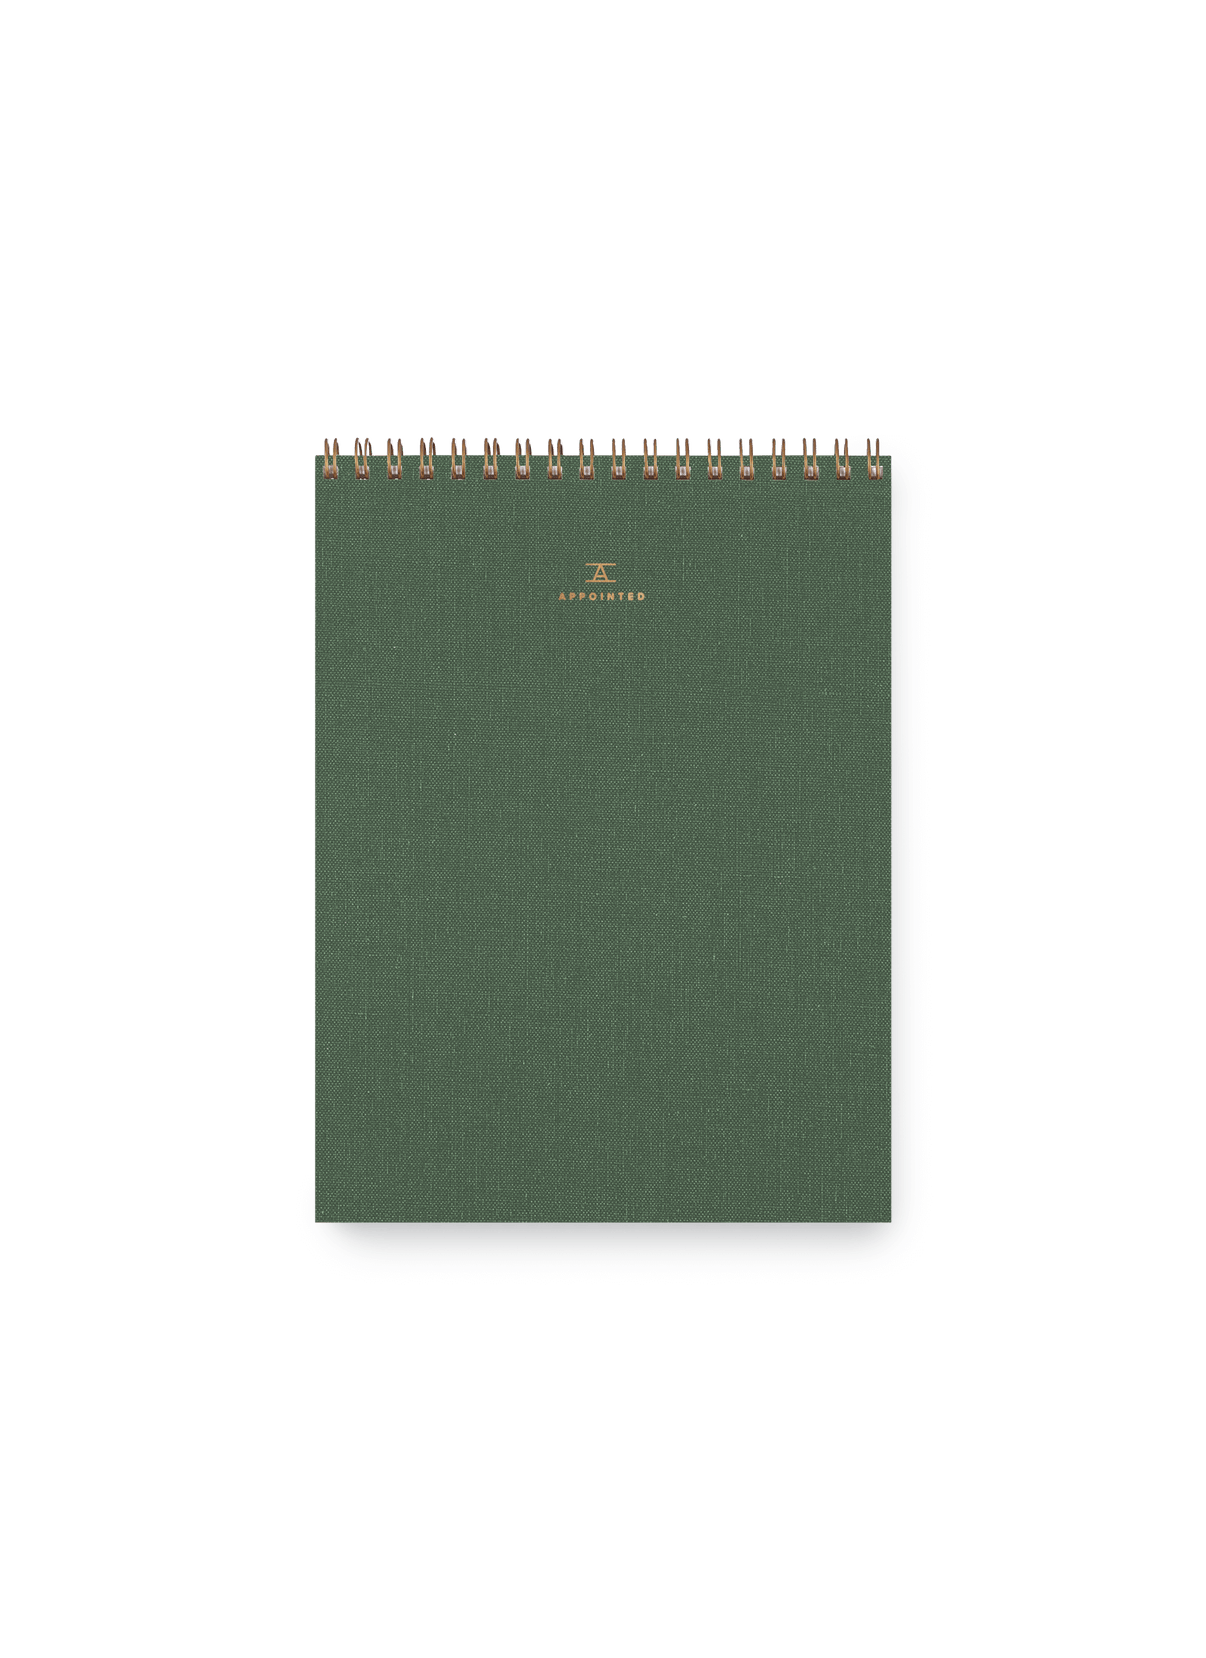 Appointed Office Notepad in Fern Green bookcloth with brass wire-o binding front view || Fern Green